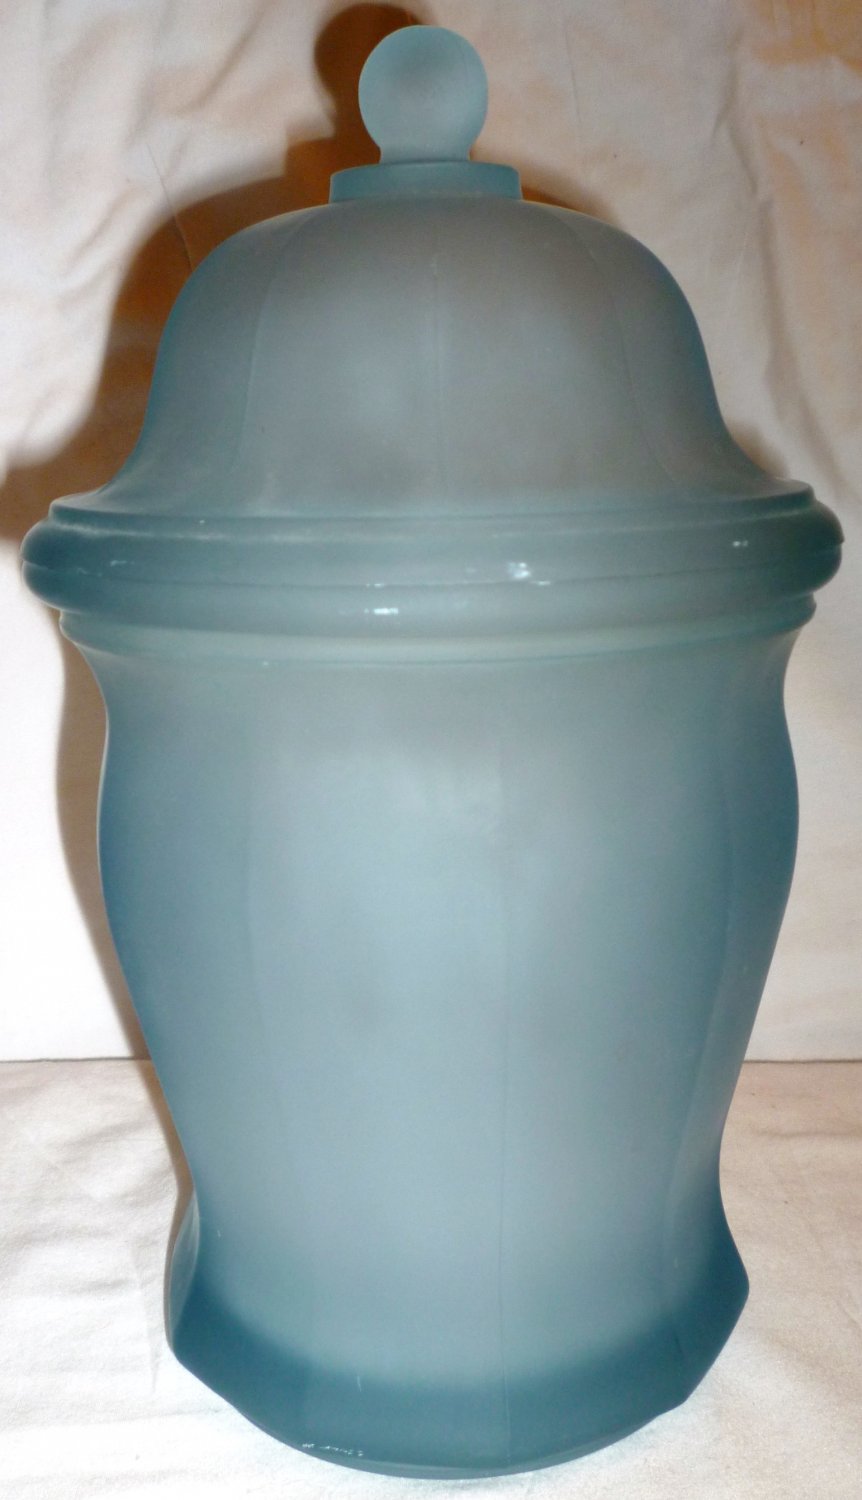 GORGEOUS INDIANA SKY BLUE SATIN GLASS CANISTER APOTHECARY COOKIE JAR